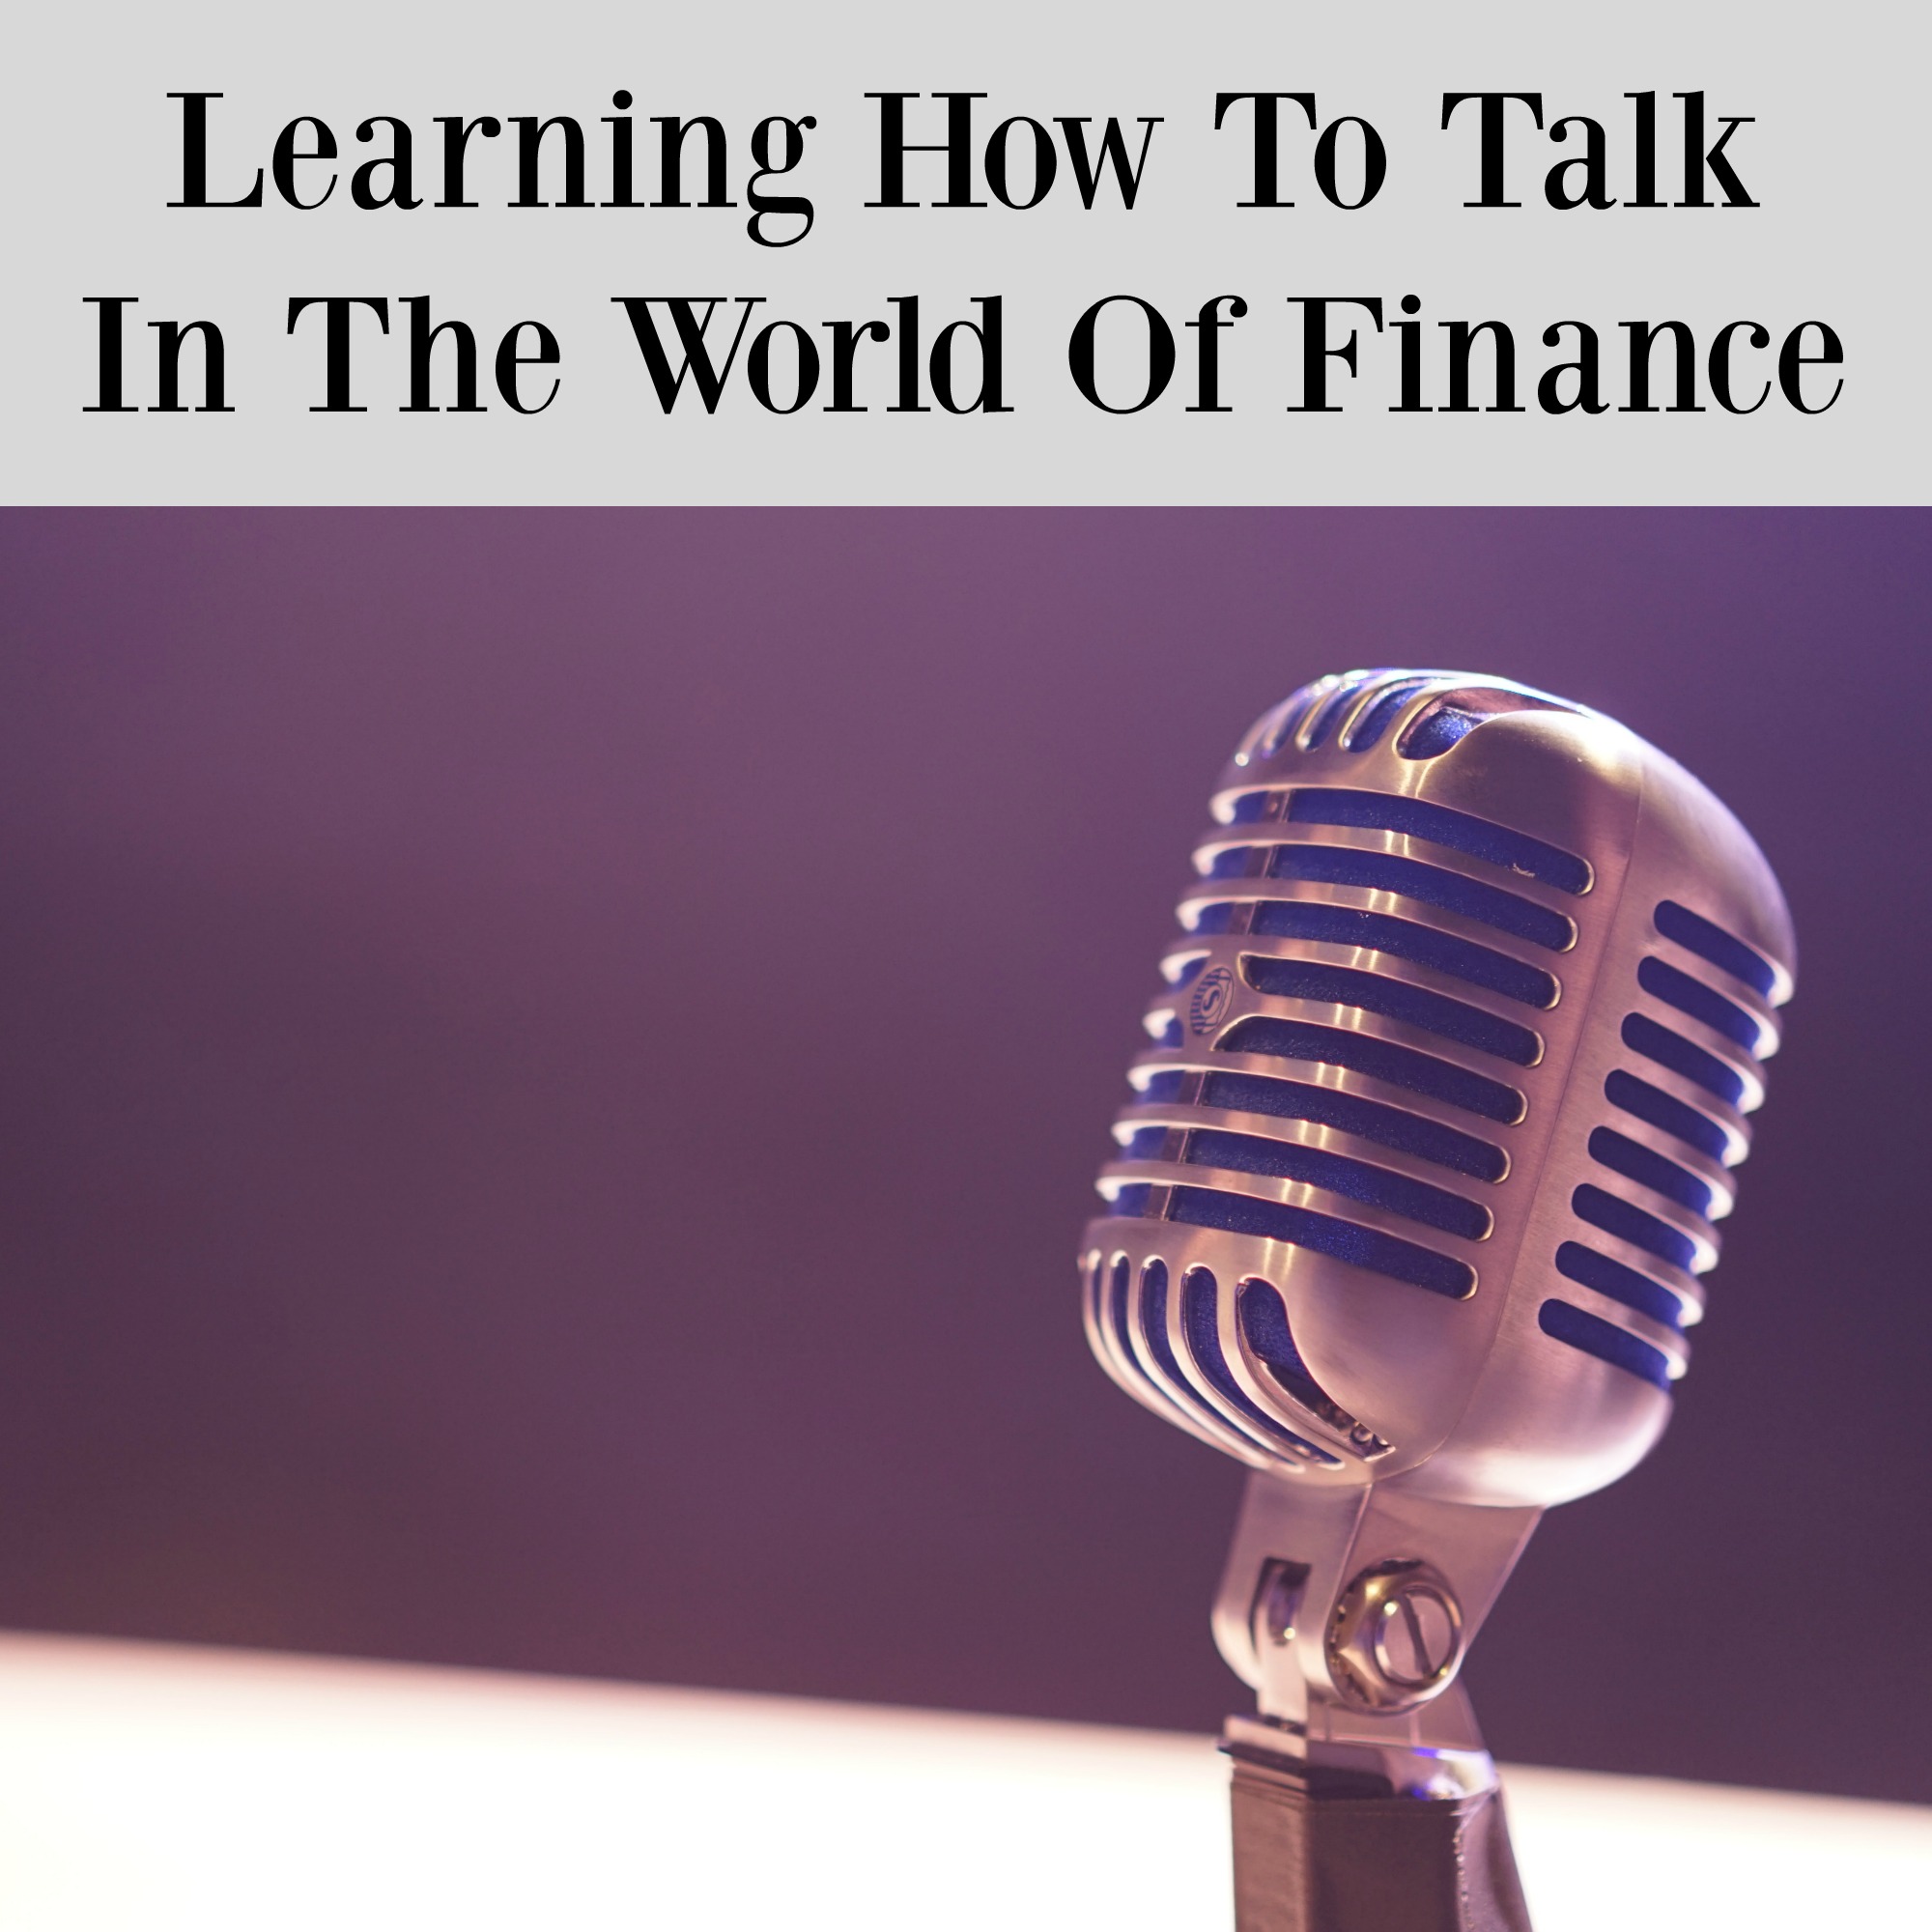 Learning How To Talk In The World Of Finance